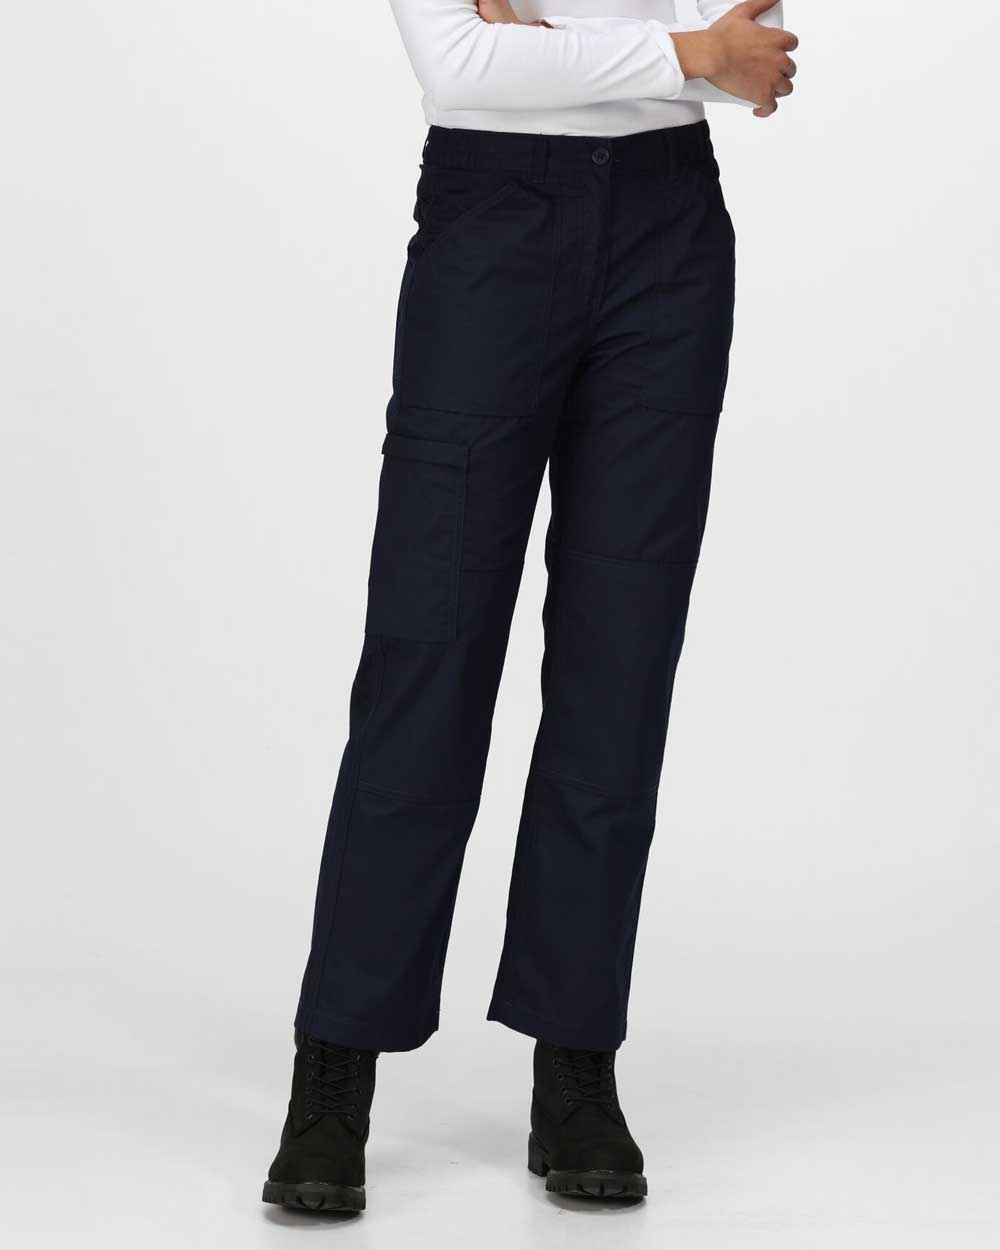 Regatta Womens New Action II Trousers in Navy 